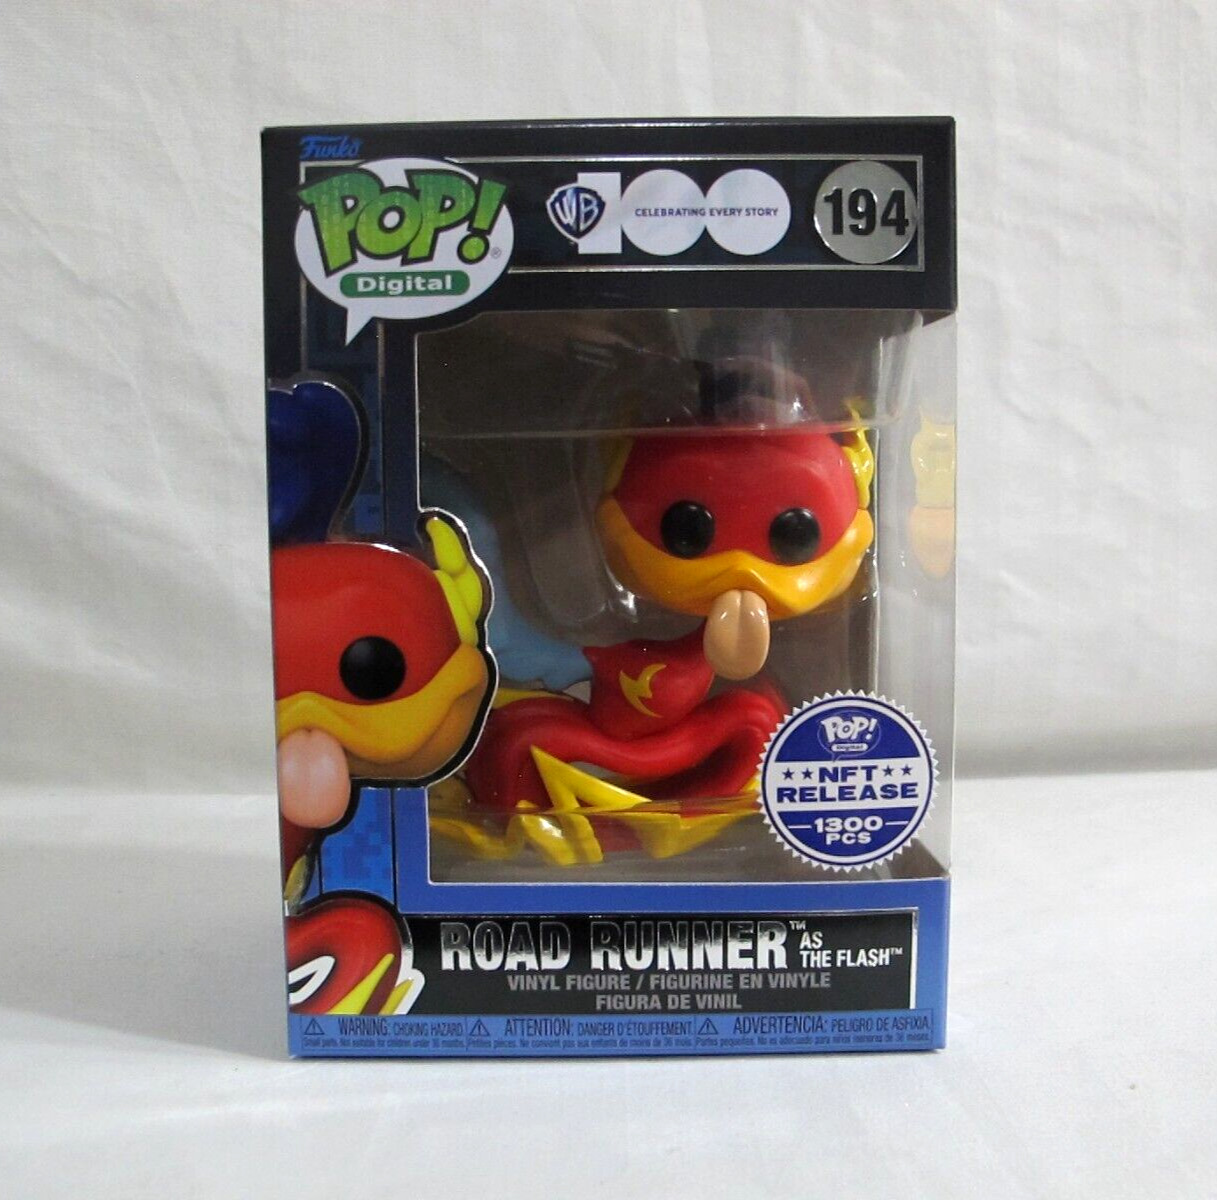 Funko Pop Digital WB - Road Runner as The Flash #194 LE 1300 - Fast Shipping